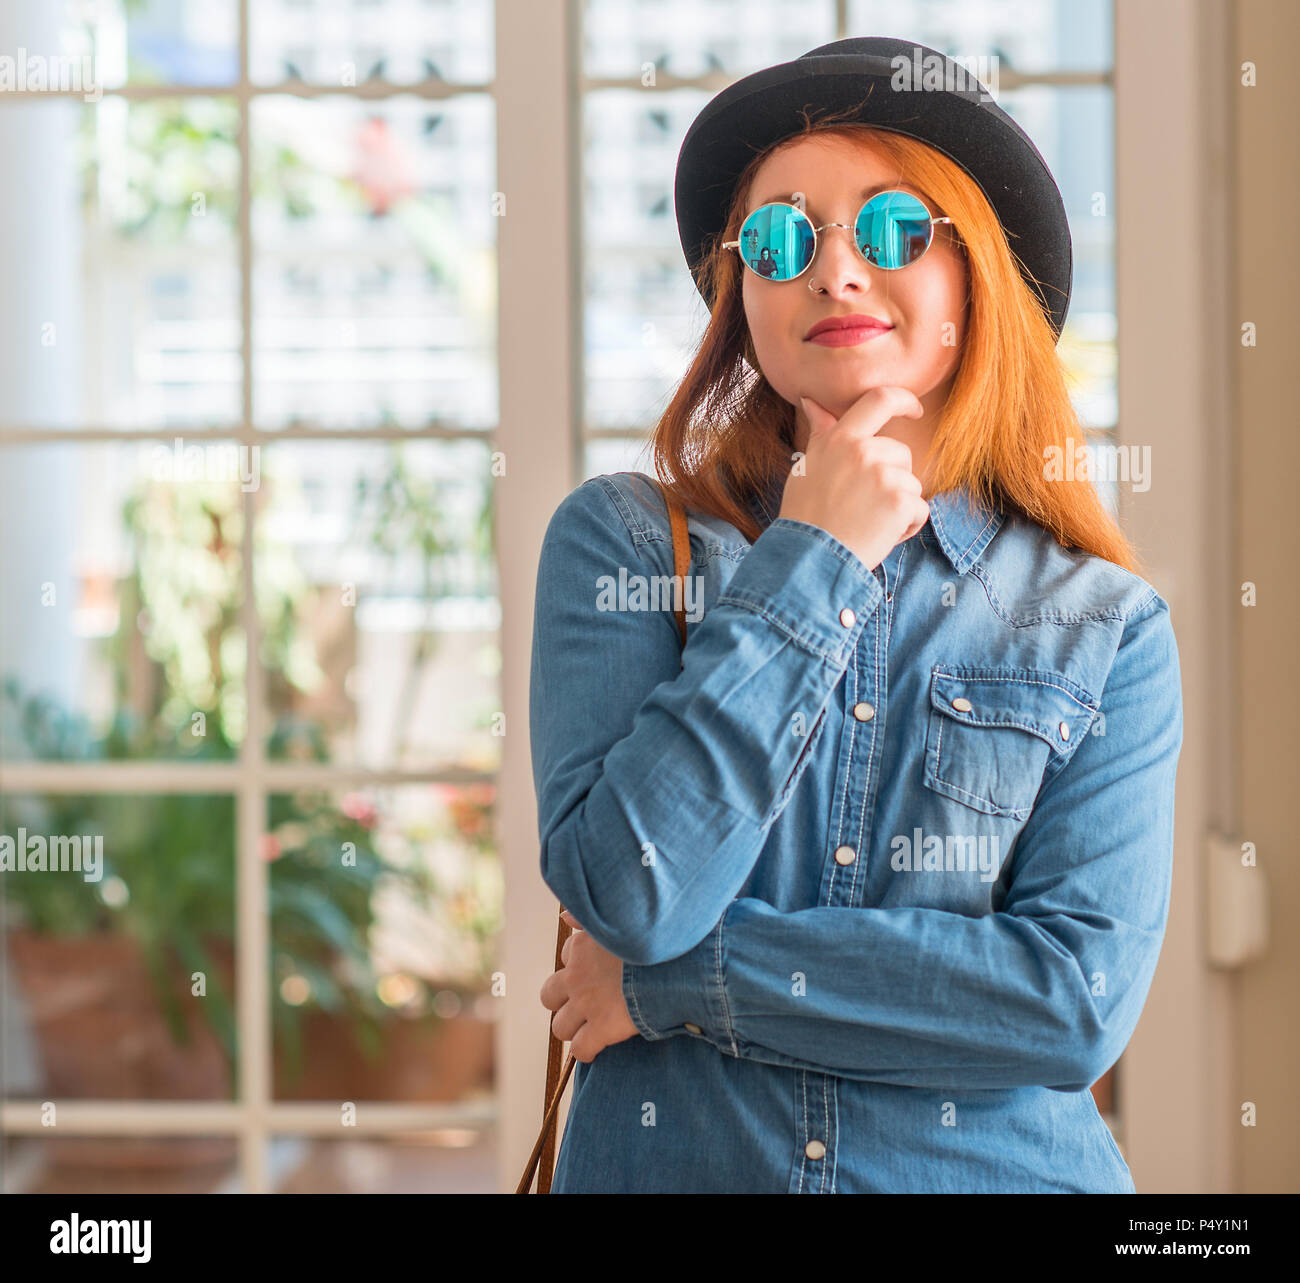 Stylish redhead woman wearing bowler hat and sunglasses looking confident at the camera with smile with crossed arms and hand raised on chin. Thinking Stock Photo